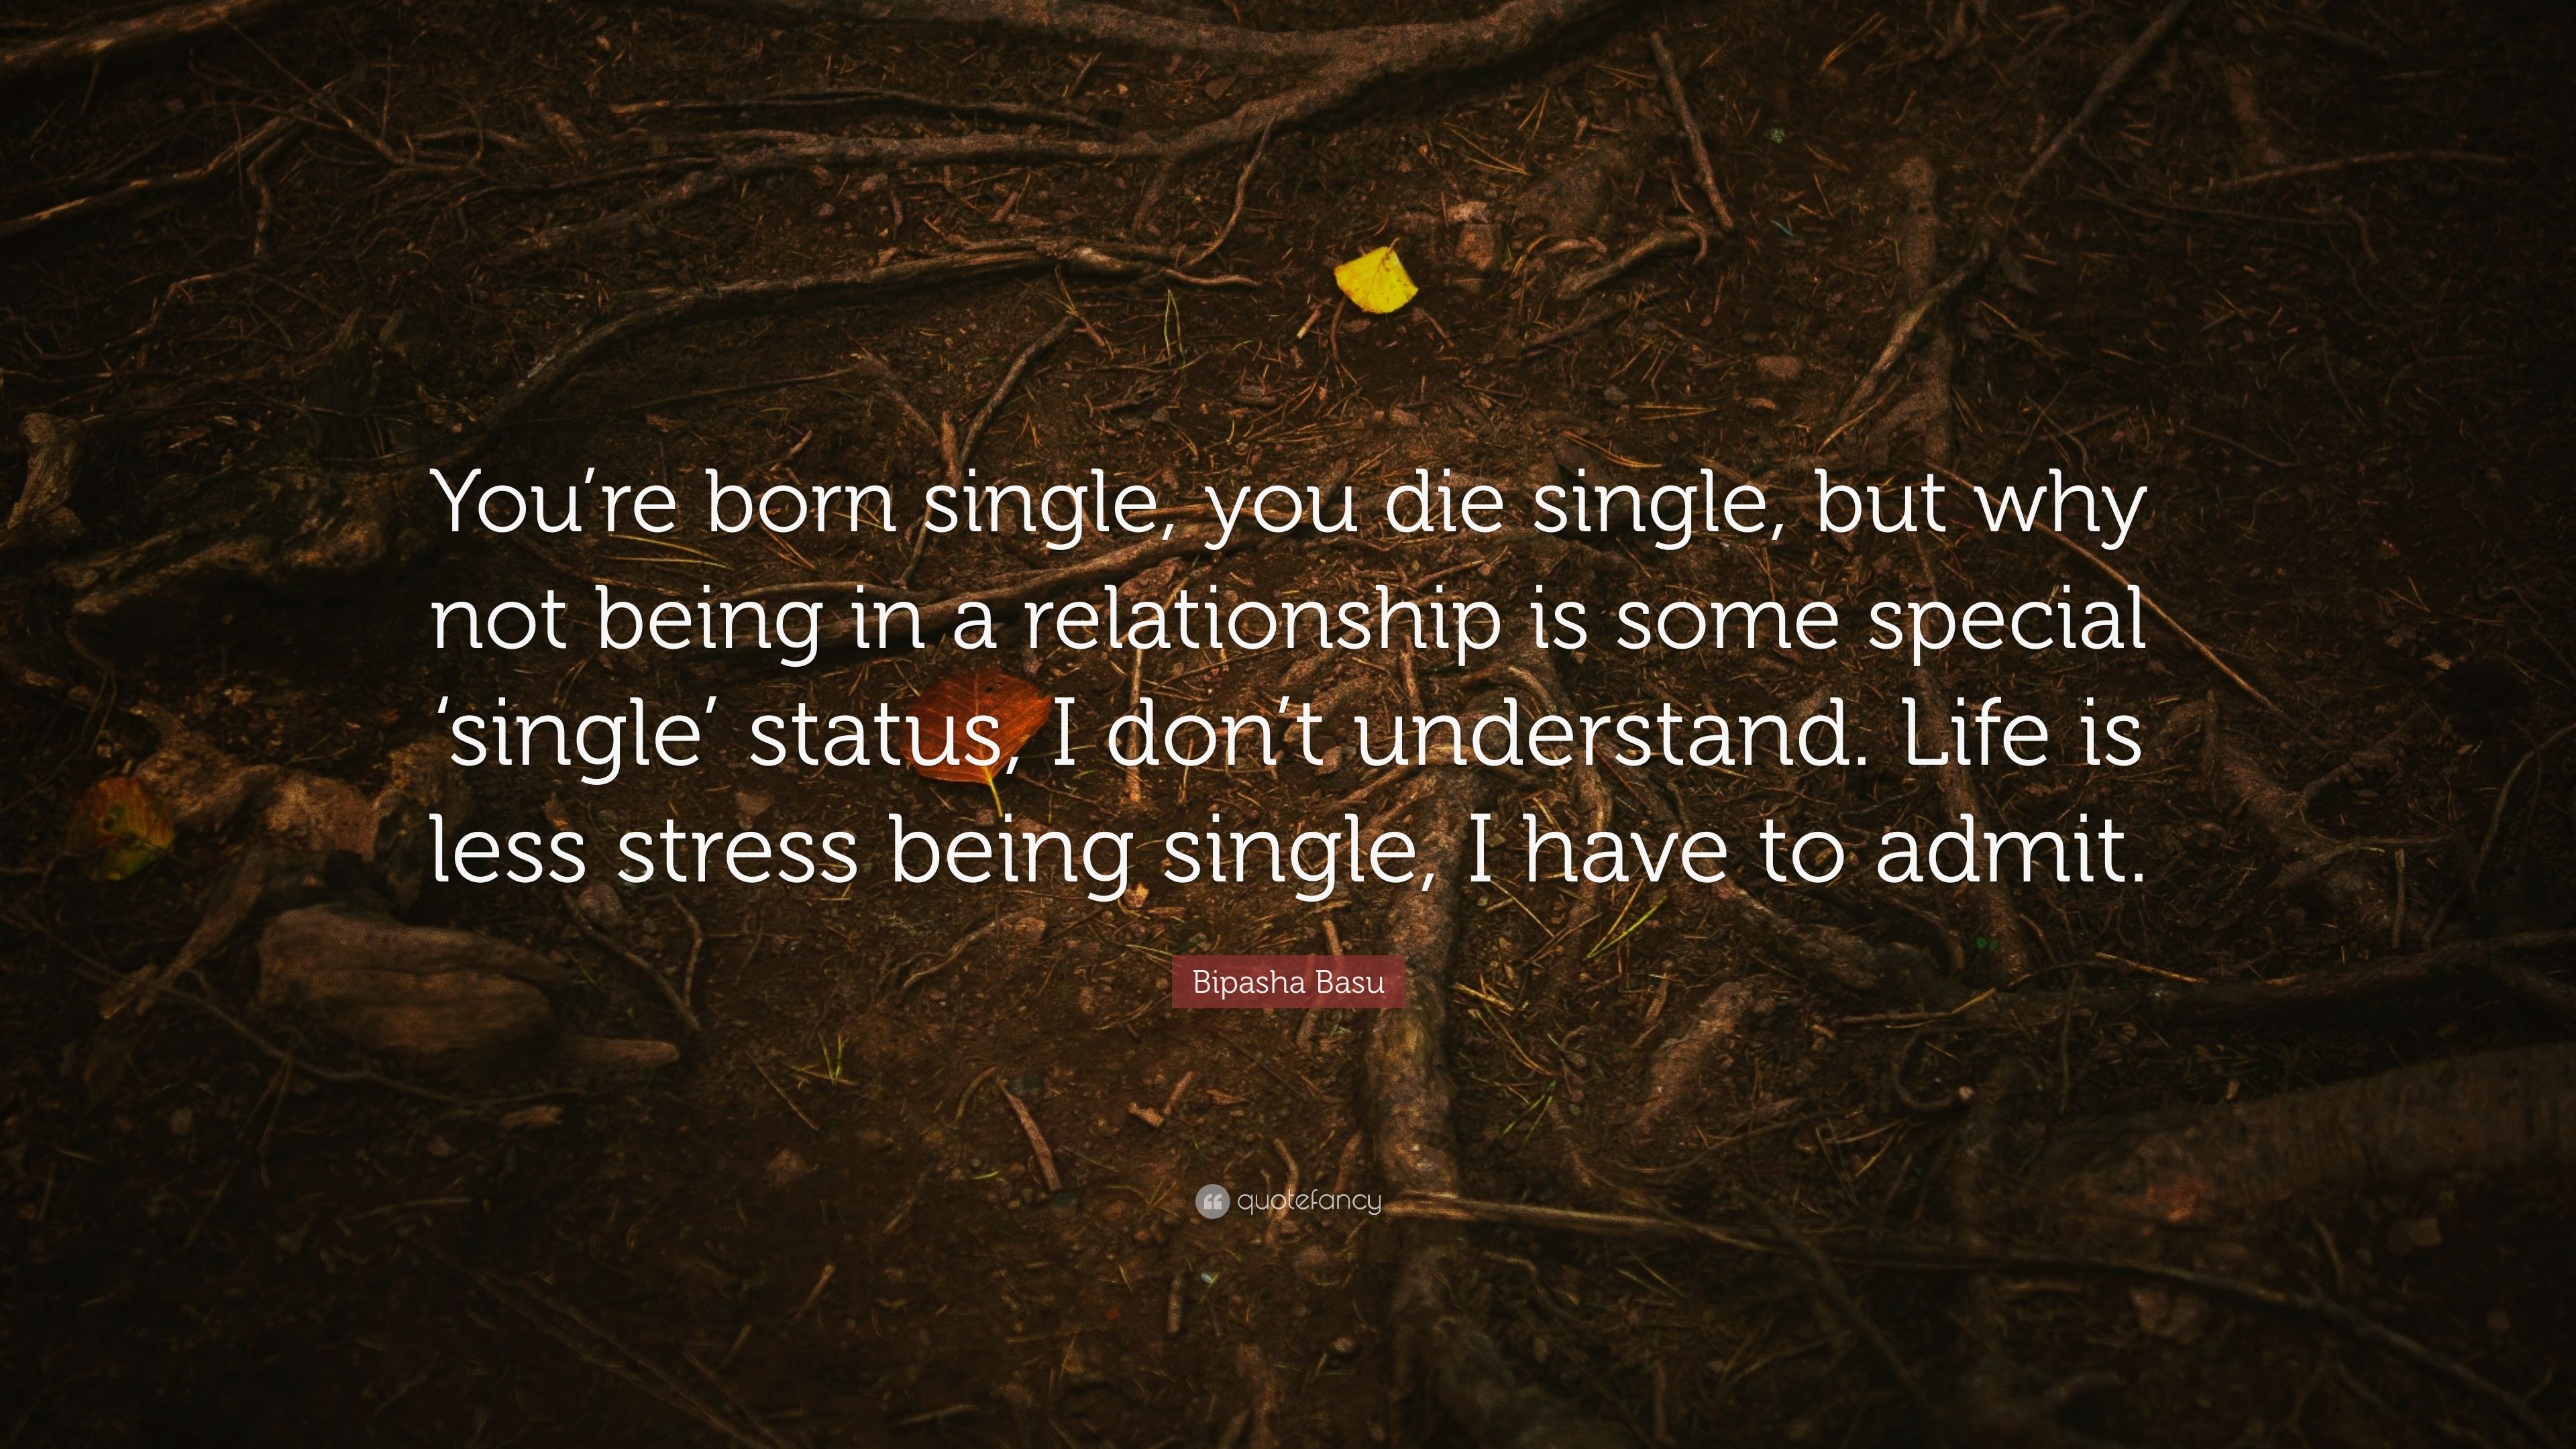 Bipasha Basu Quote: “You're born single, you die single, but why not being in a relationship is some special 'single' status, I don't underst.” (7 wallpaper)